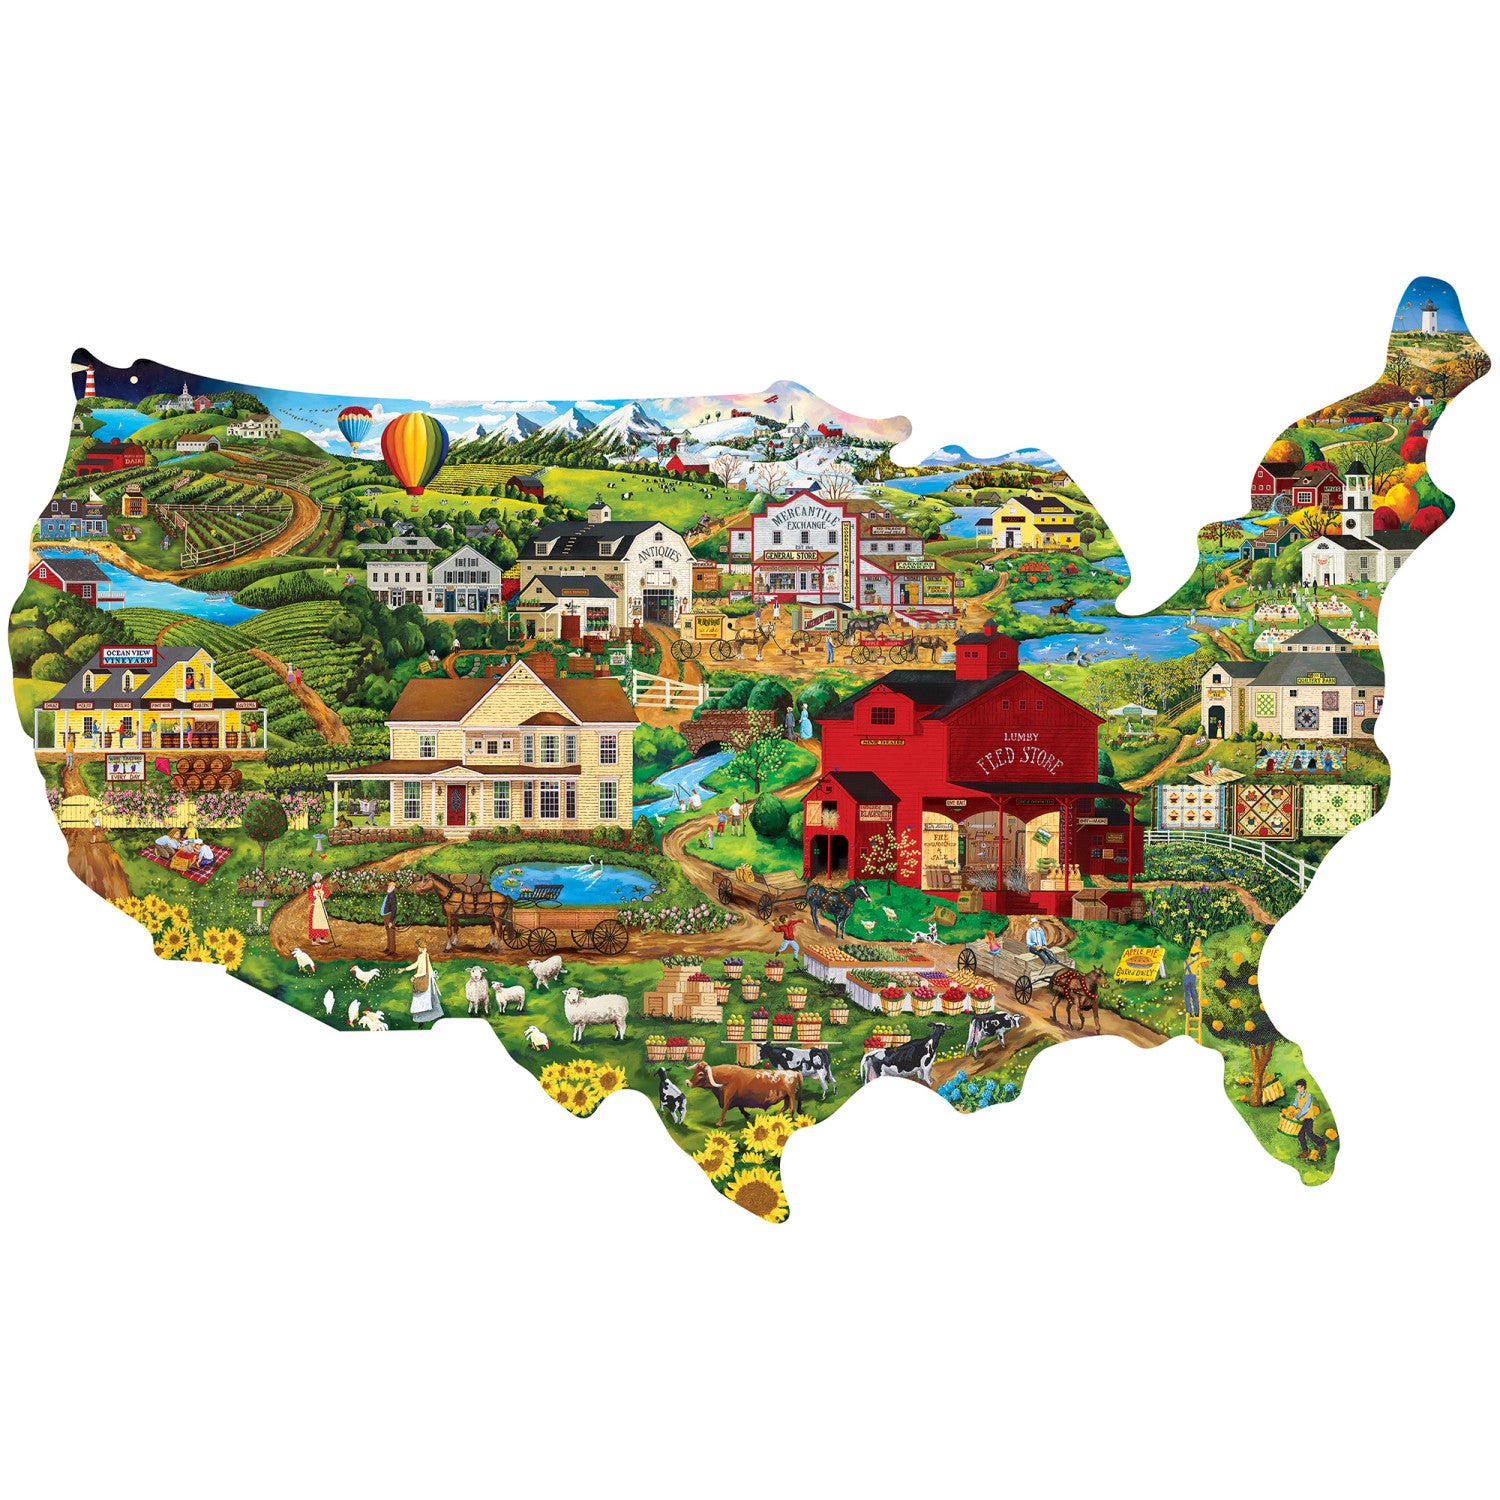 Contours Shaped - America the Beautiful 1000 Piece Puzzle By Art Poulin